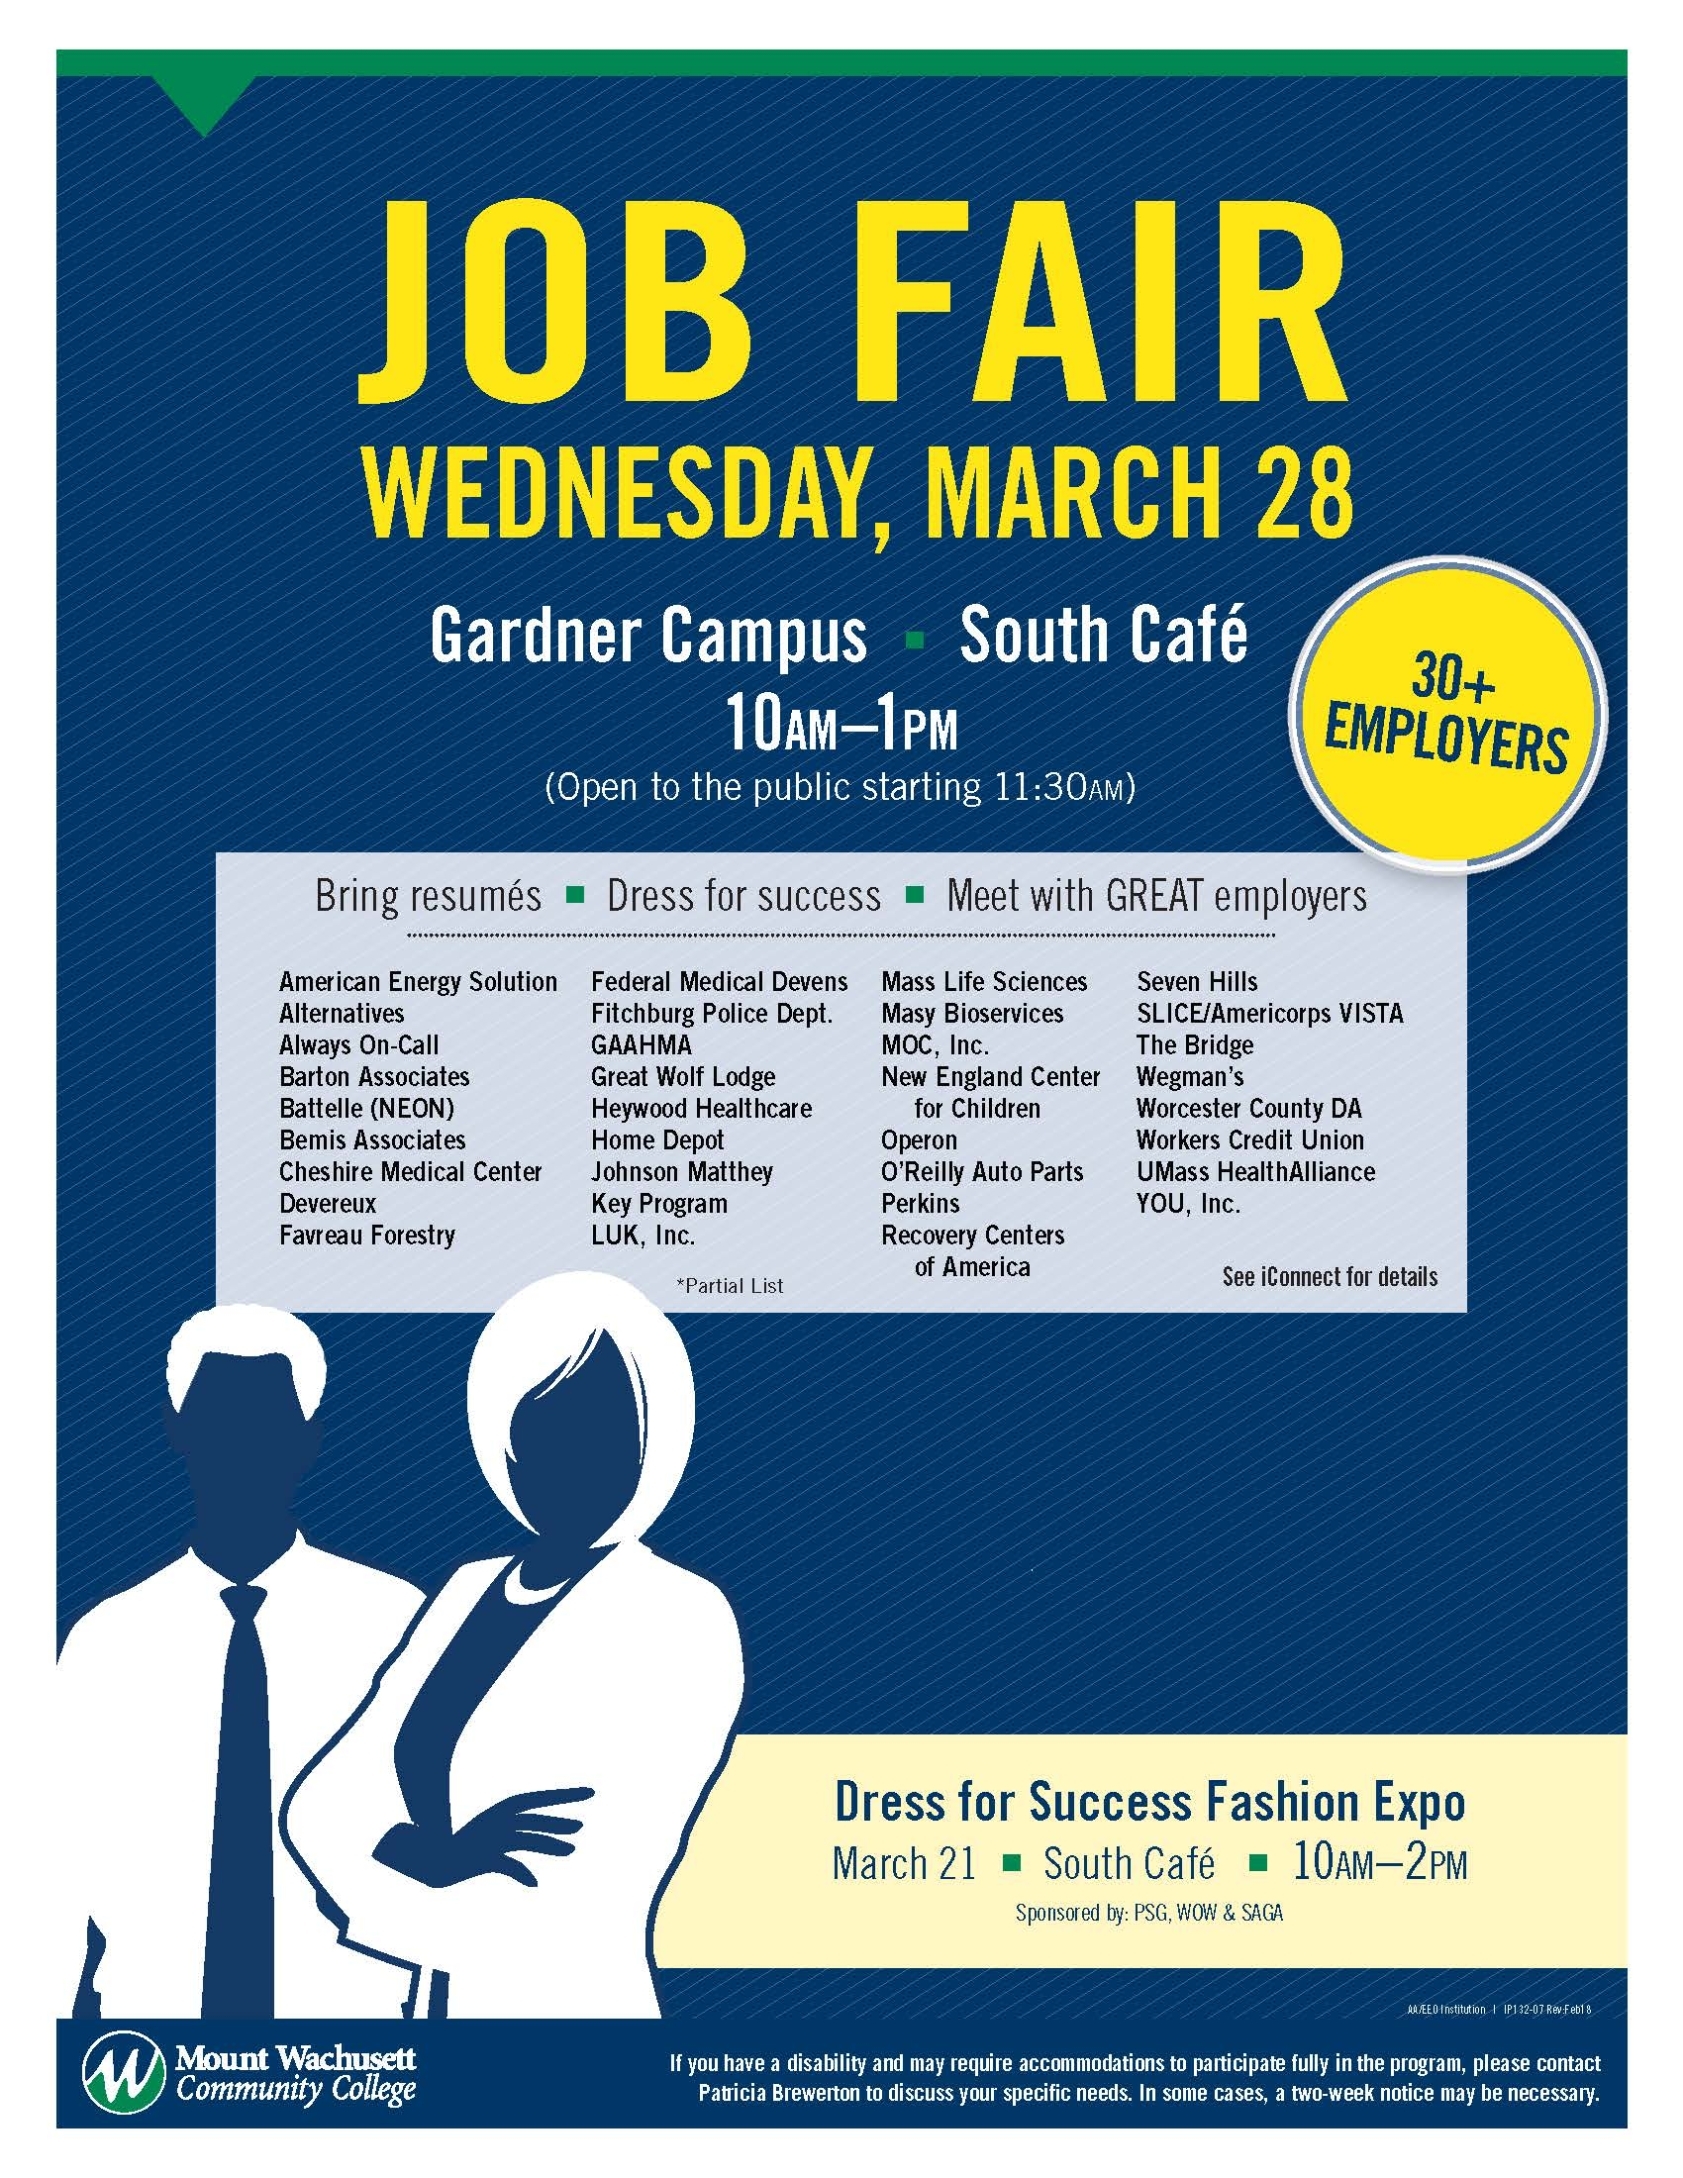 Job Fair To Bring Over 30 Employers To Mwcc - Mount Wachusett Community Throughout Job Fair Flyer Template Free